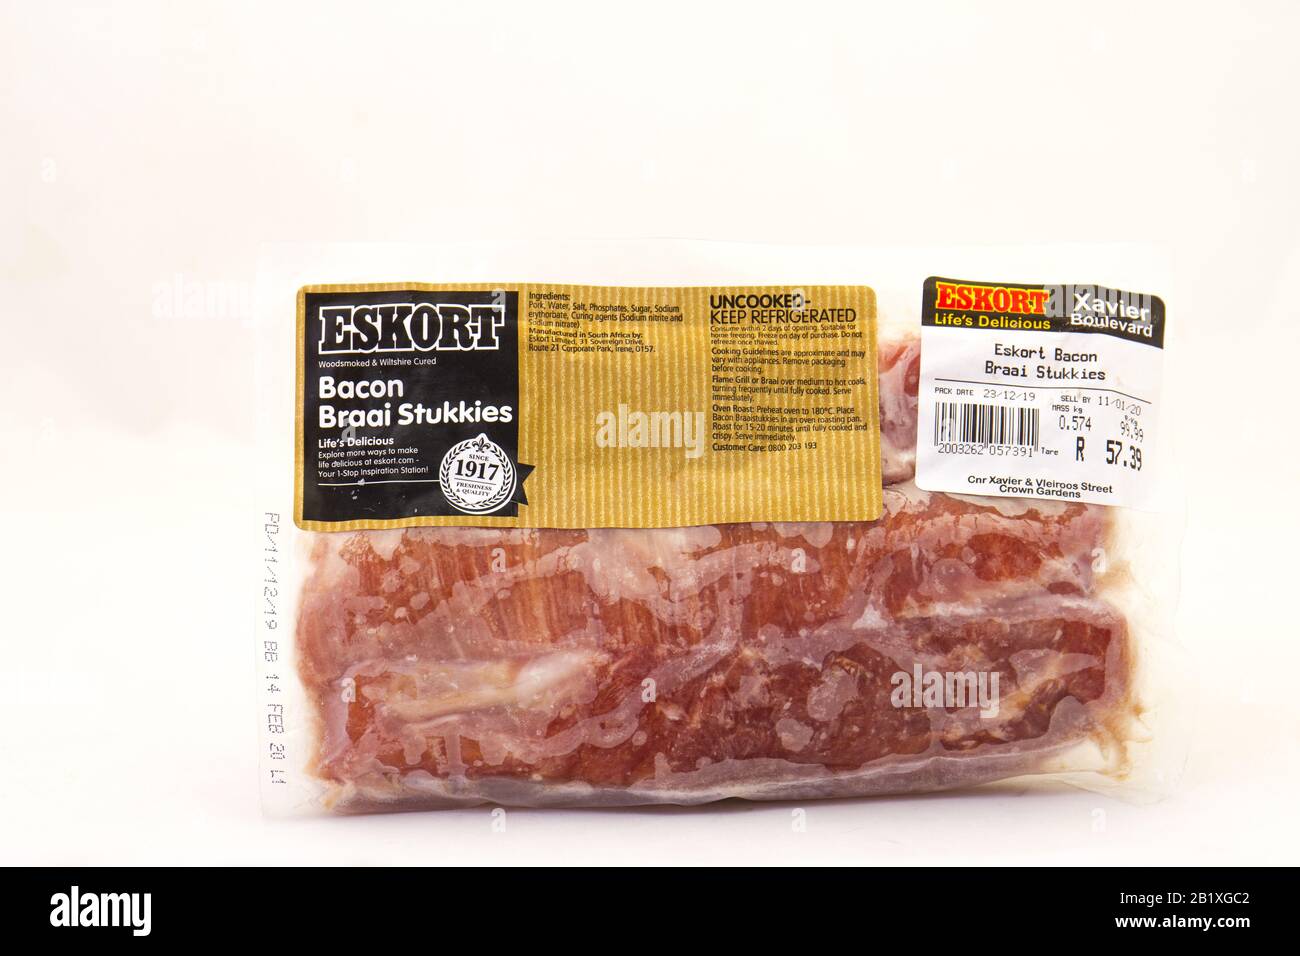 Alberton, South Africa - a packet of Eskort bacon barbecue pieces isolated on a clear background image with copy space Stock Photo